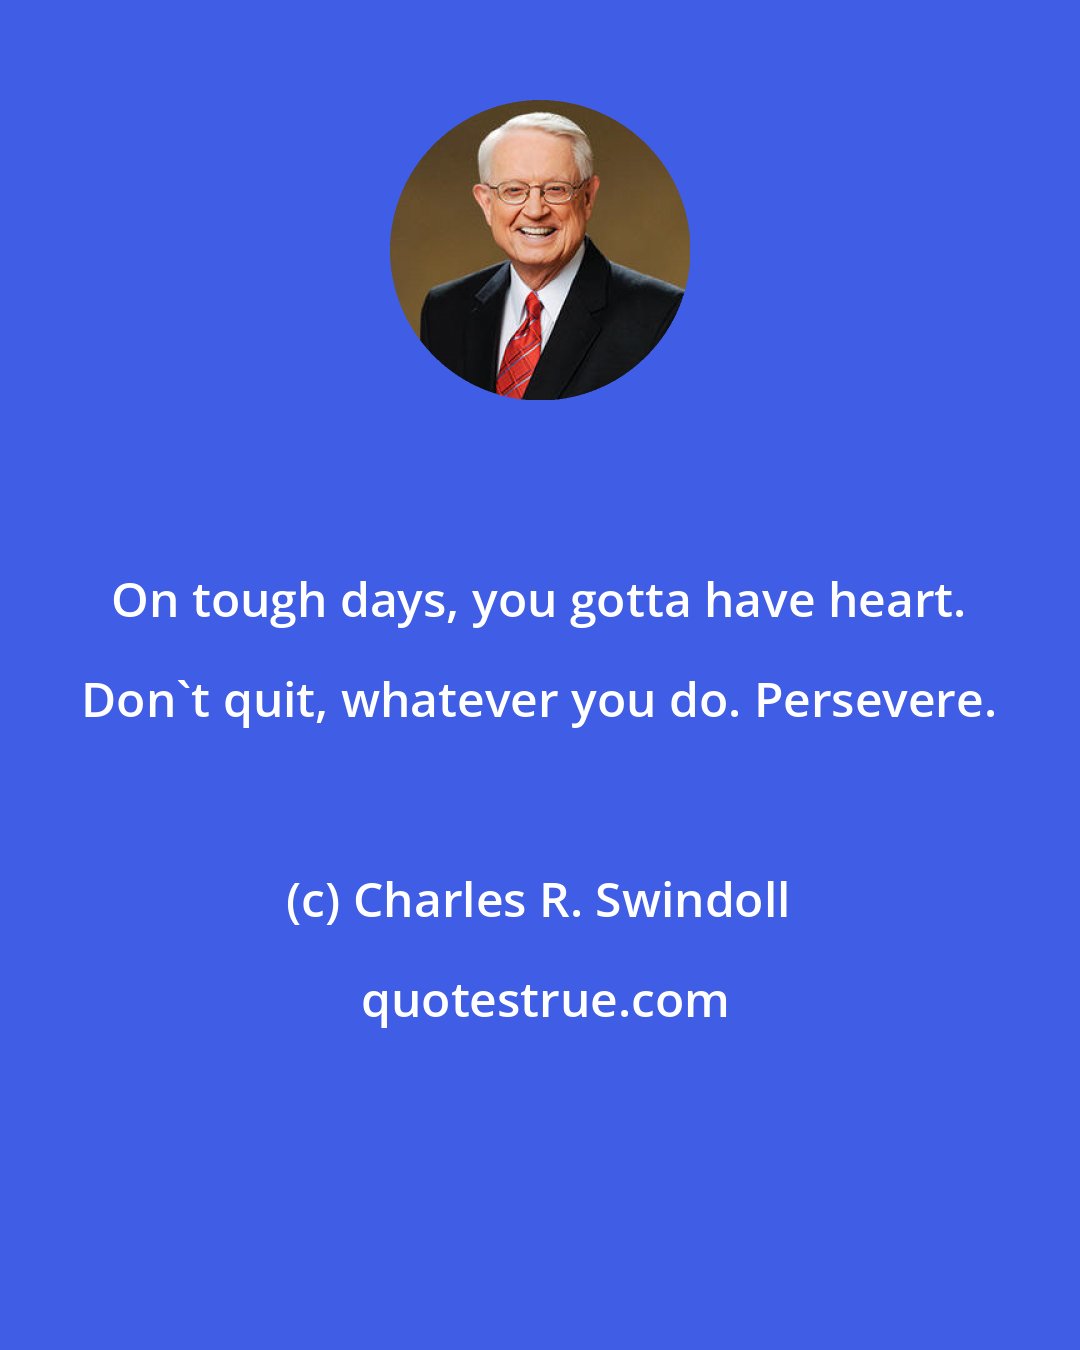 Charles R. Swindoll: On tough days, you gotta have heart. Don't quit, whatever you do. Persevere.